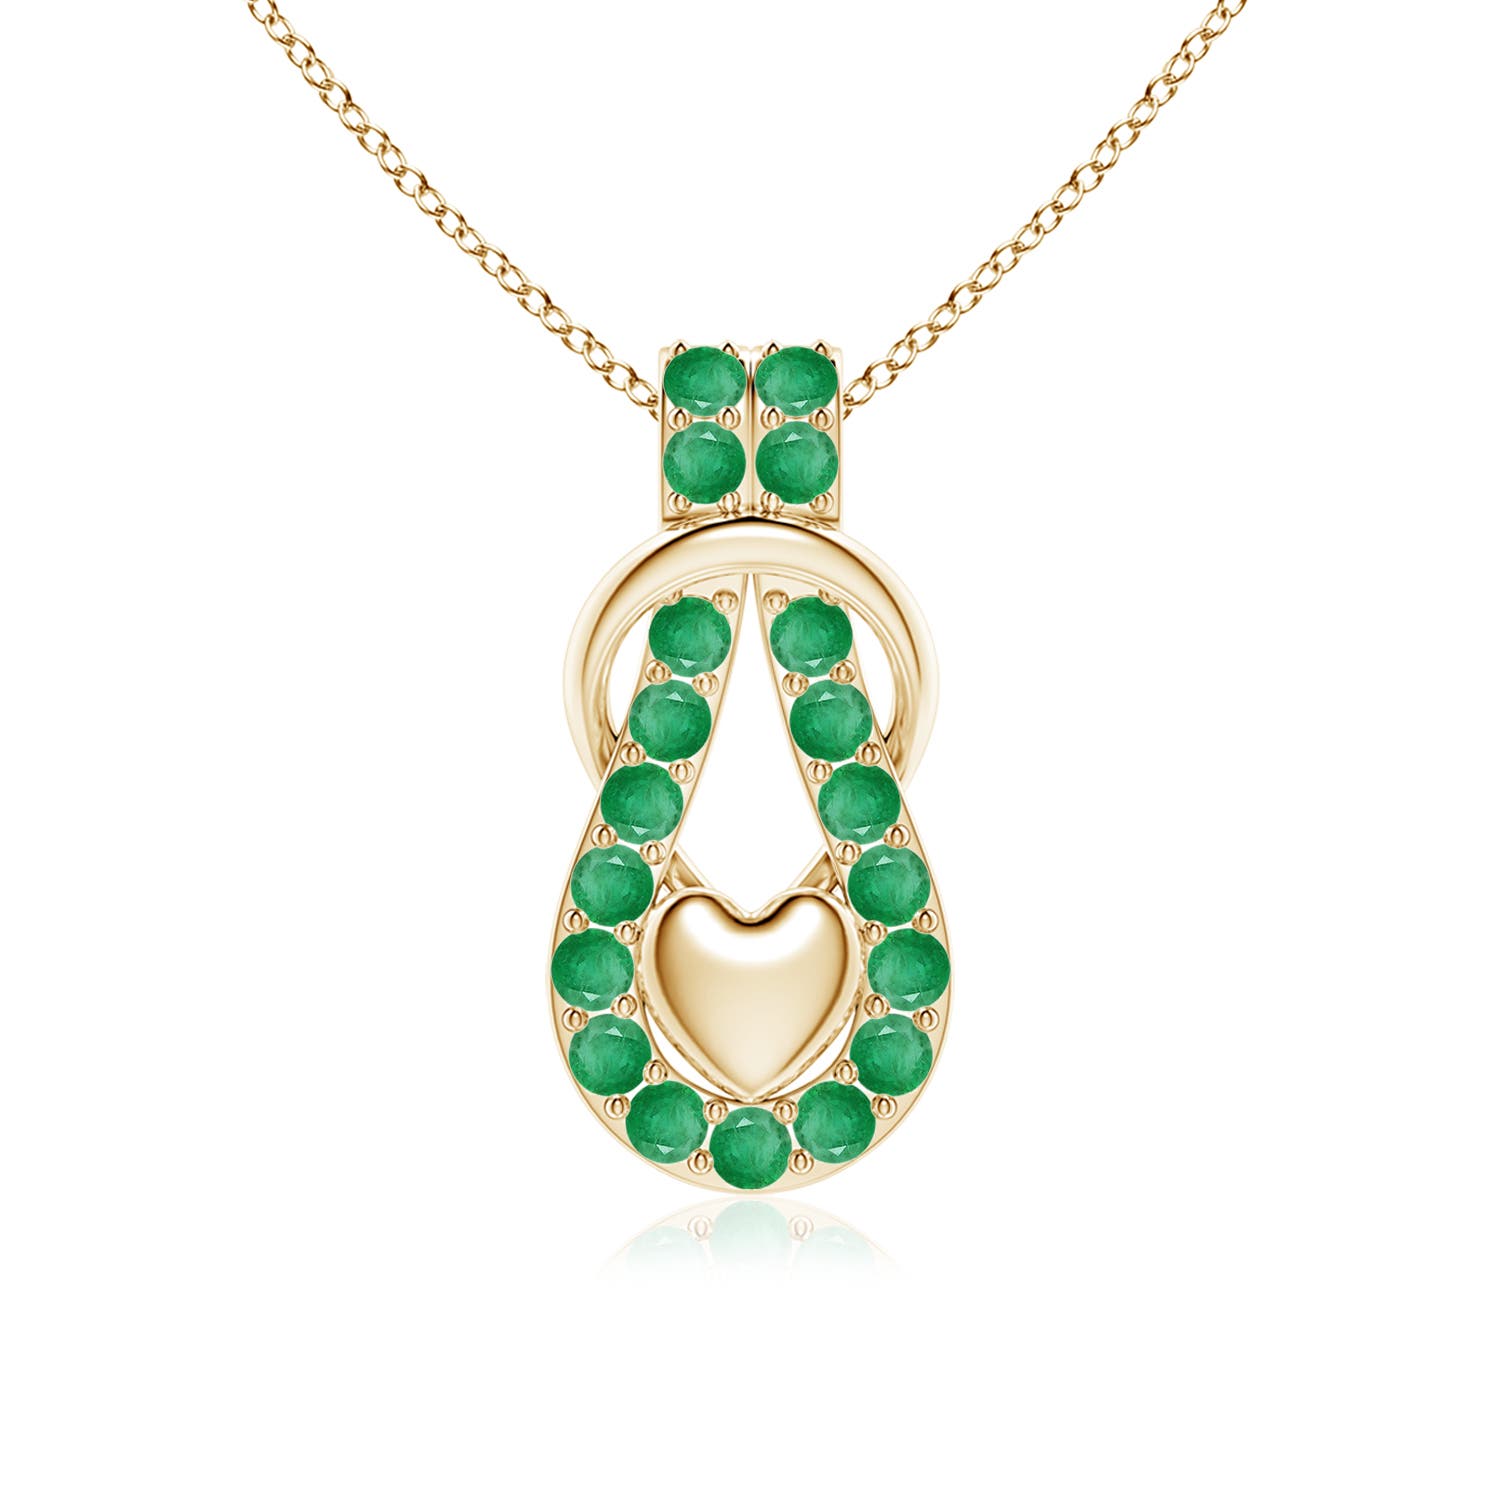 A - Emerald / 1.2 CT / 18 KT Yellow Gold